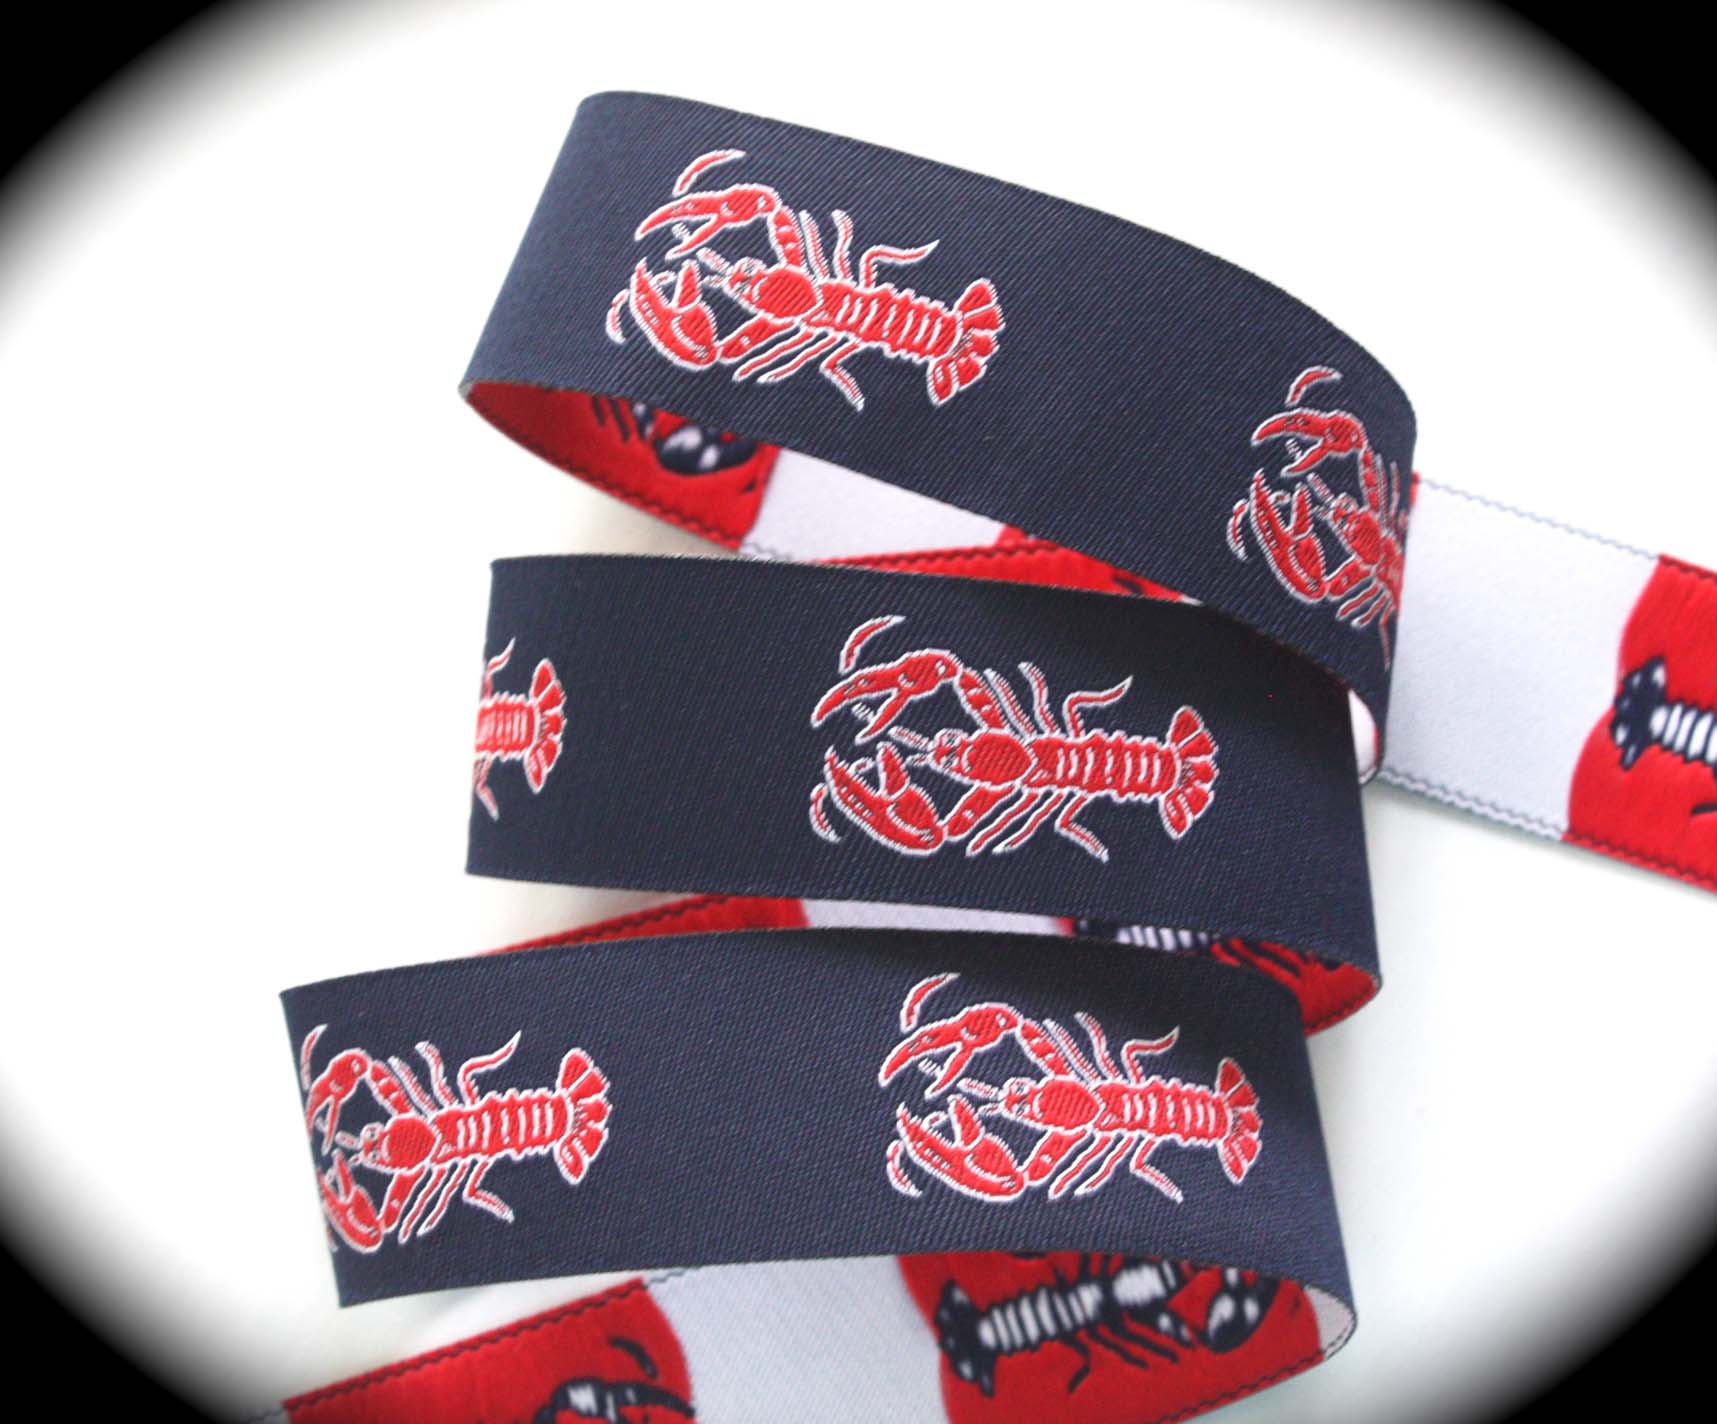 Lobster2015A 1" x 25 yards Navy, Red and White